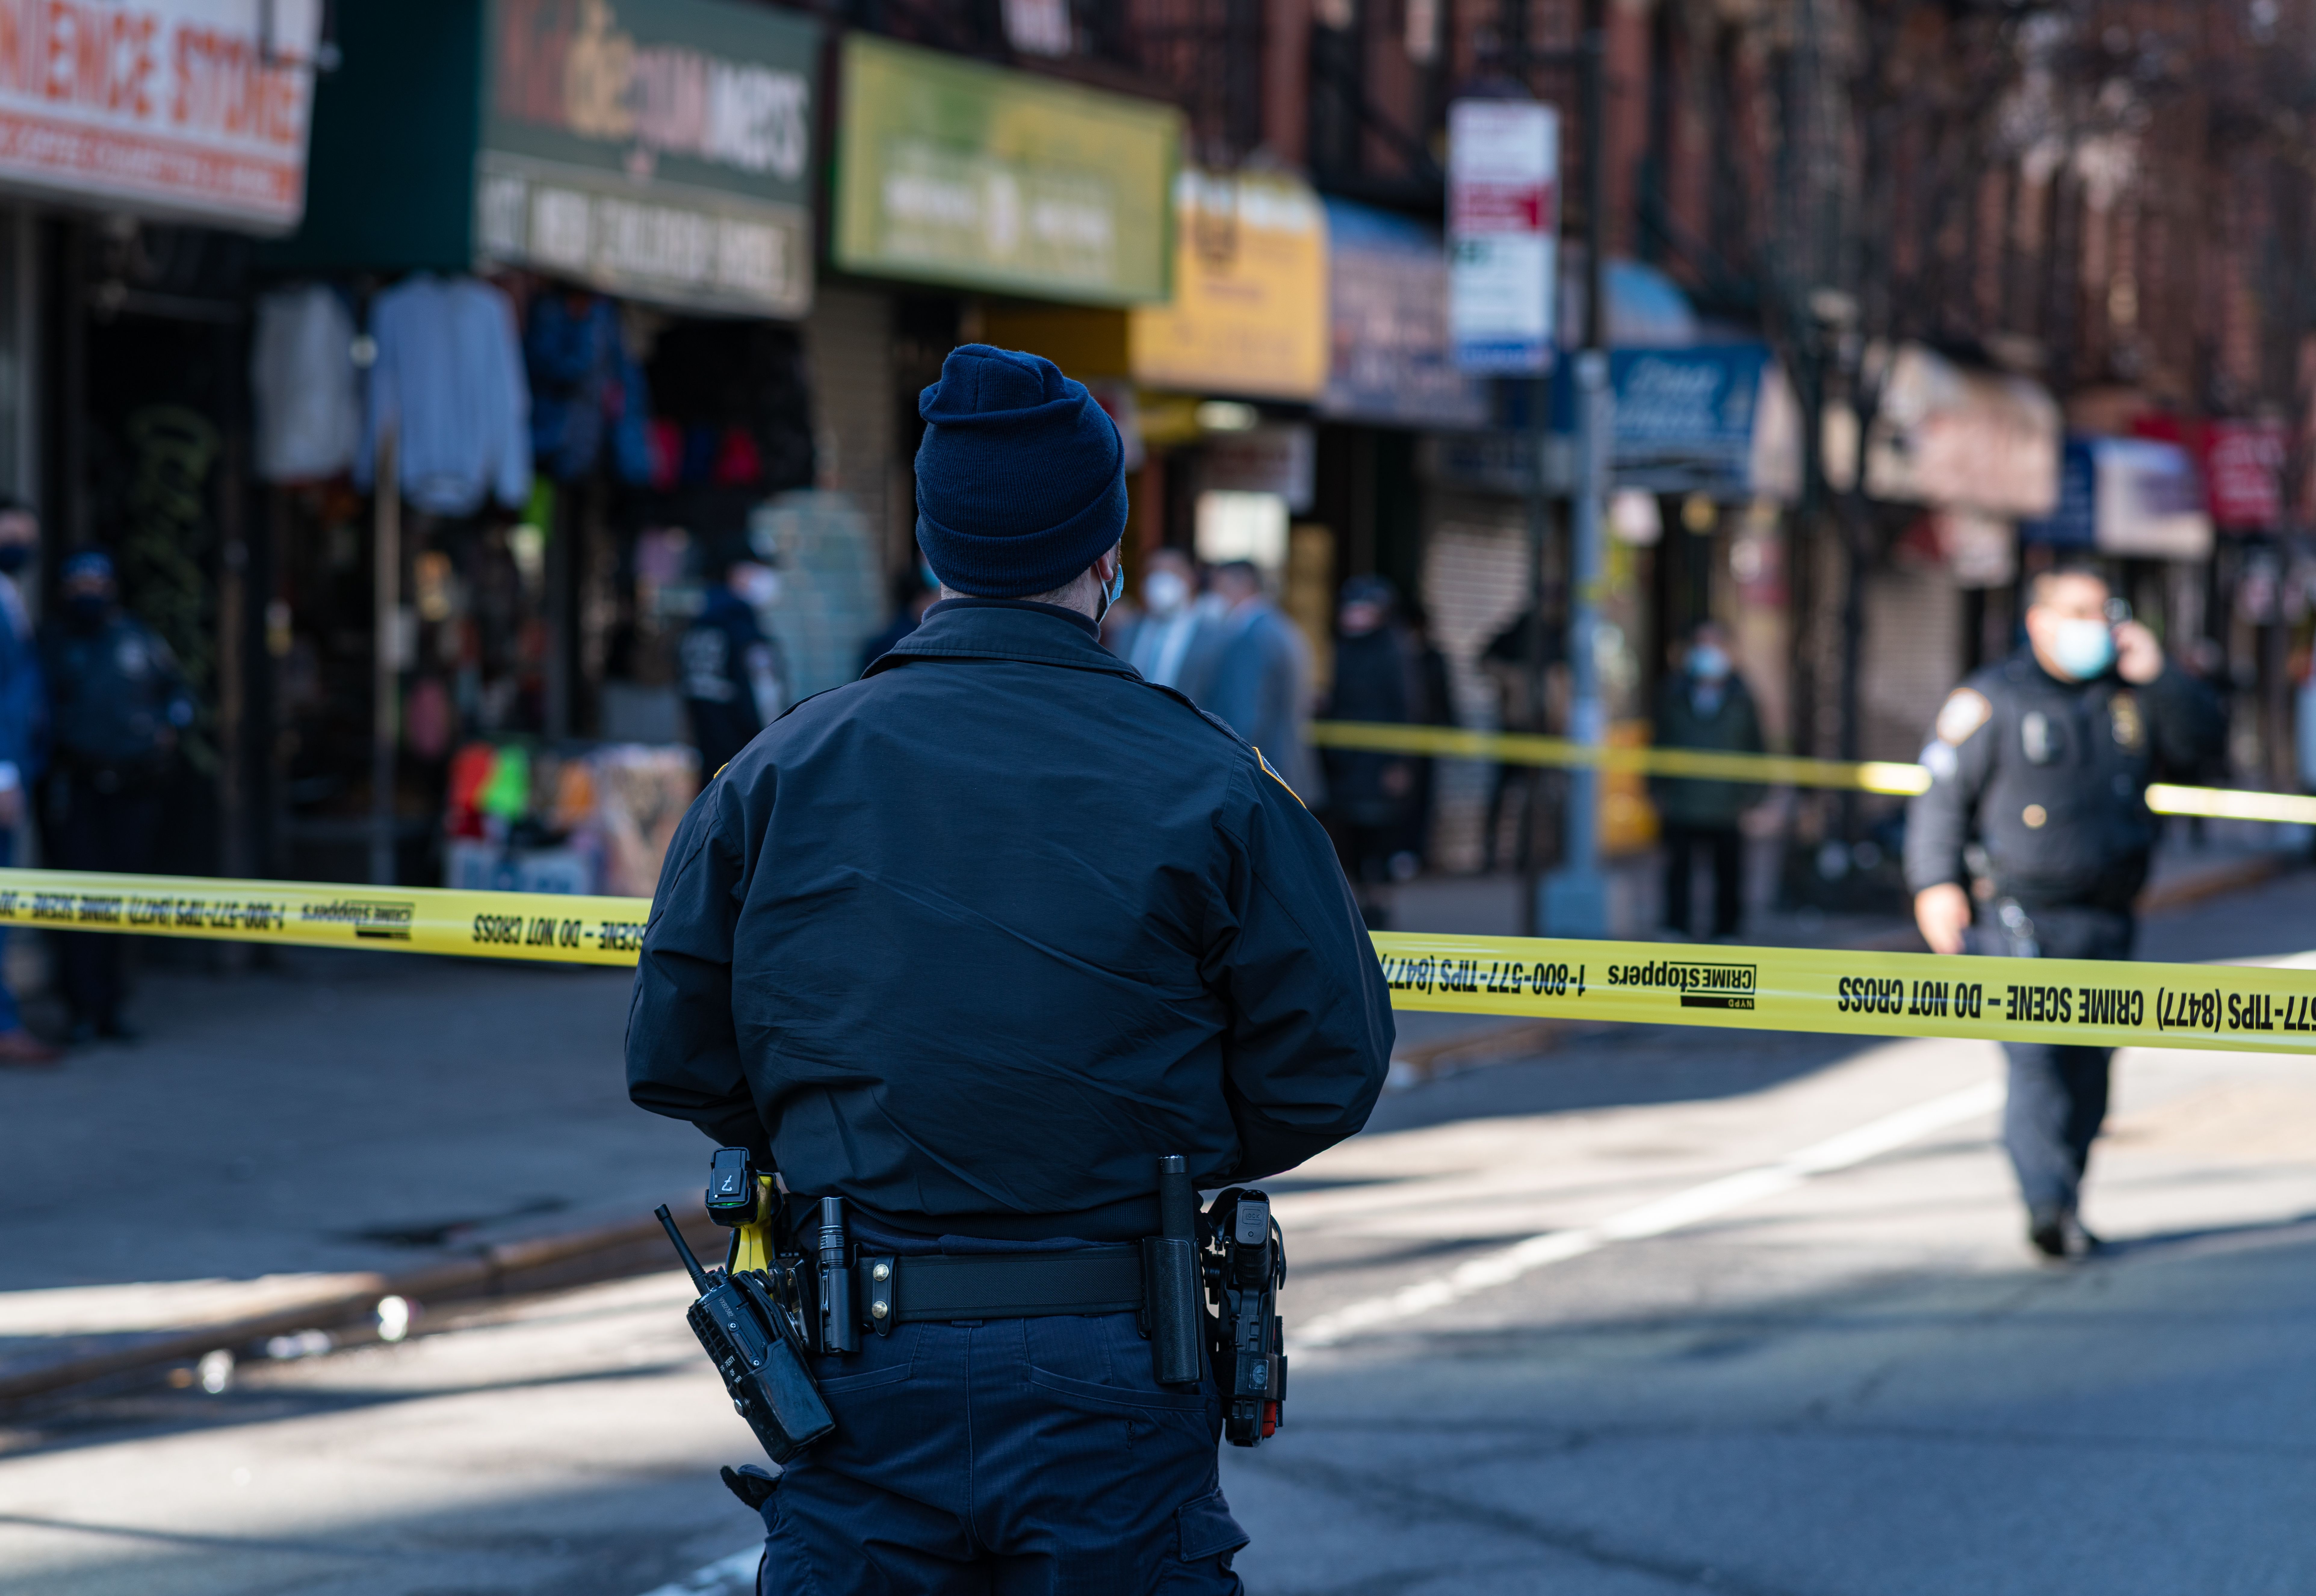 Murders, shootings down in NYC since 2021, but other crimes
rose sharply, per police data